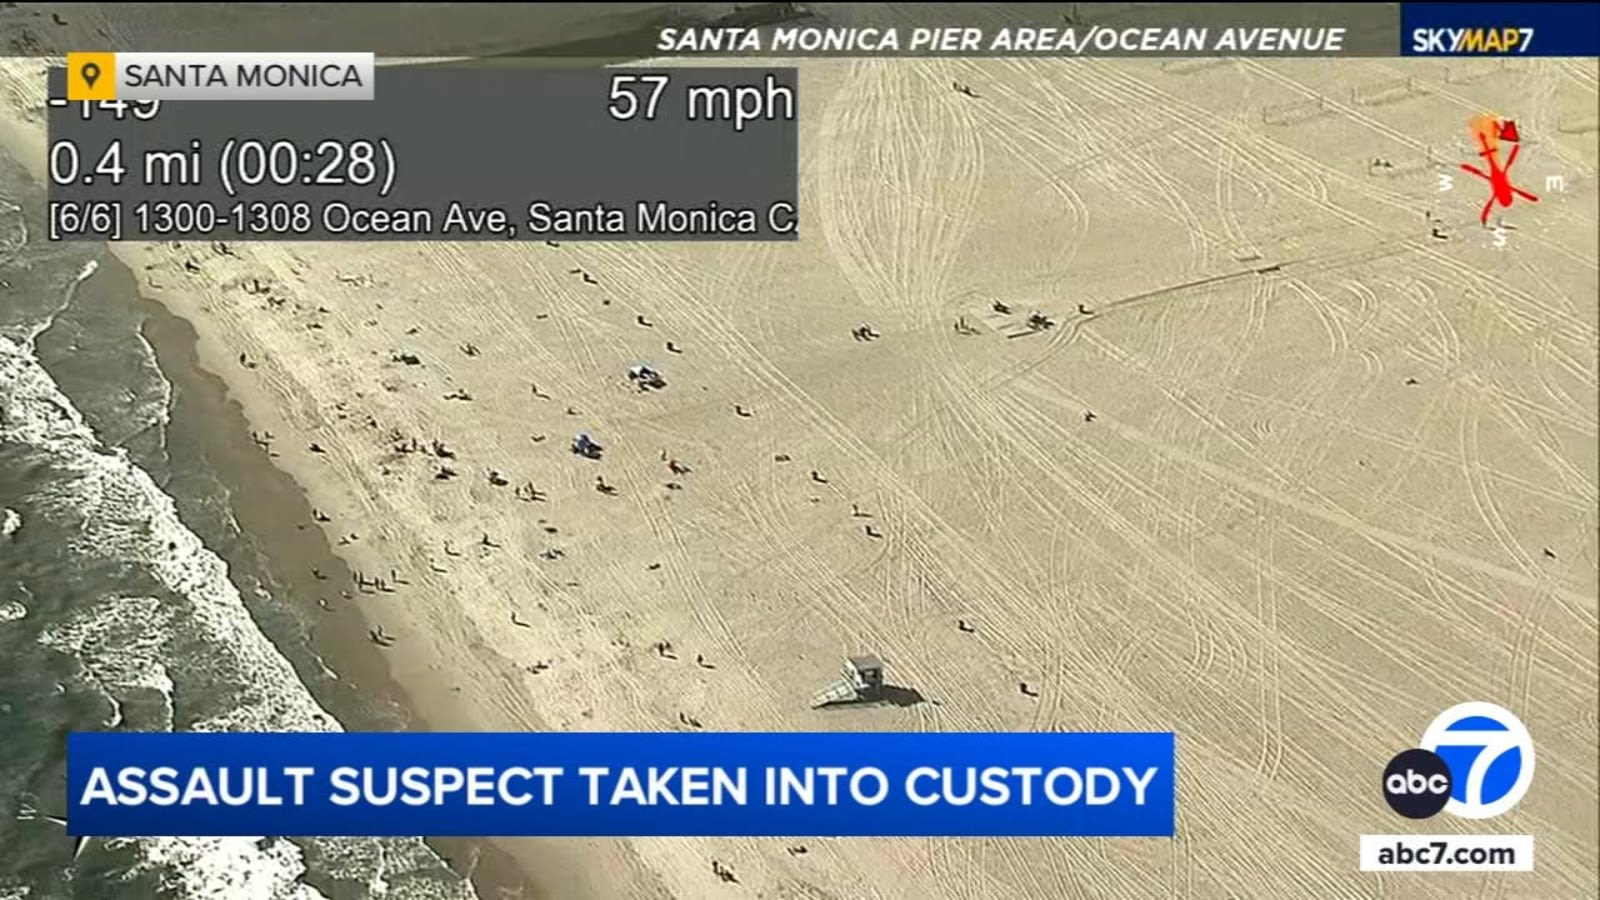 Teen among 3 victims assaulted in Santa Monica, police say; suspect in custody